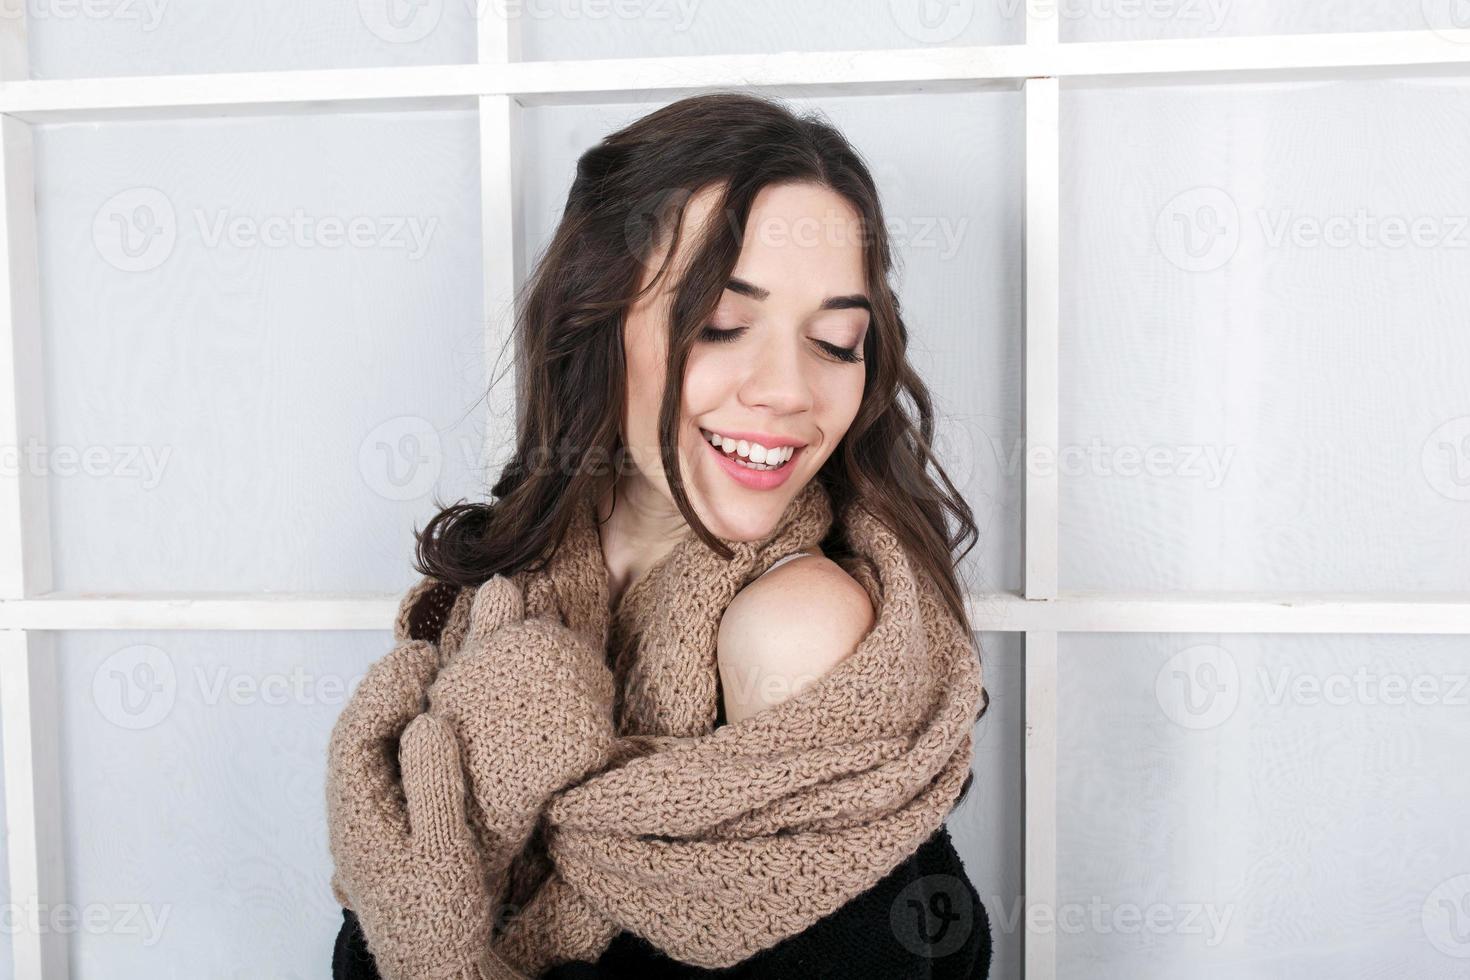 Cute girl in winter outfit posing for the camera. Christmas background photo